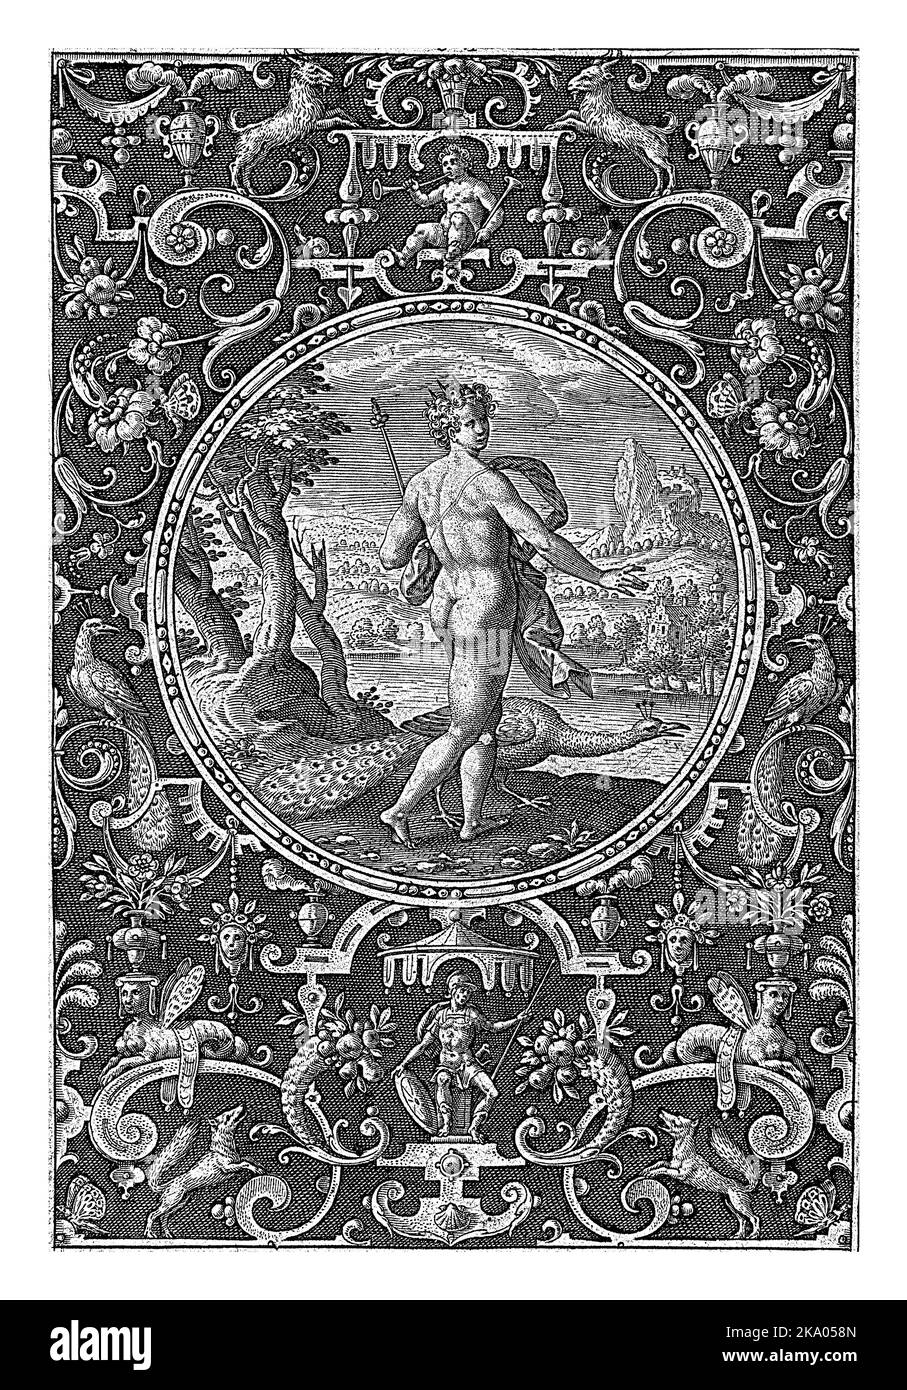 Medallion in a grotesque frame. Bottom center a warrior under a canopy. Shaded background. Stock Photo